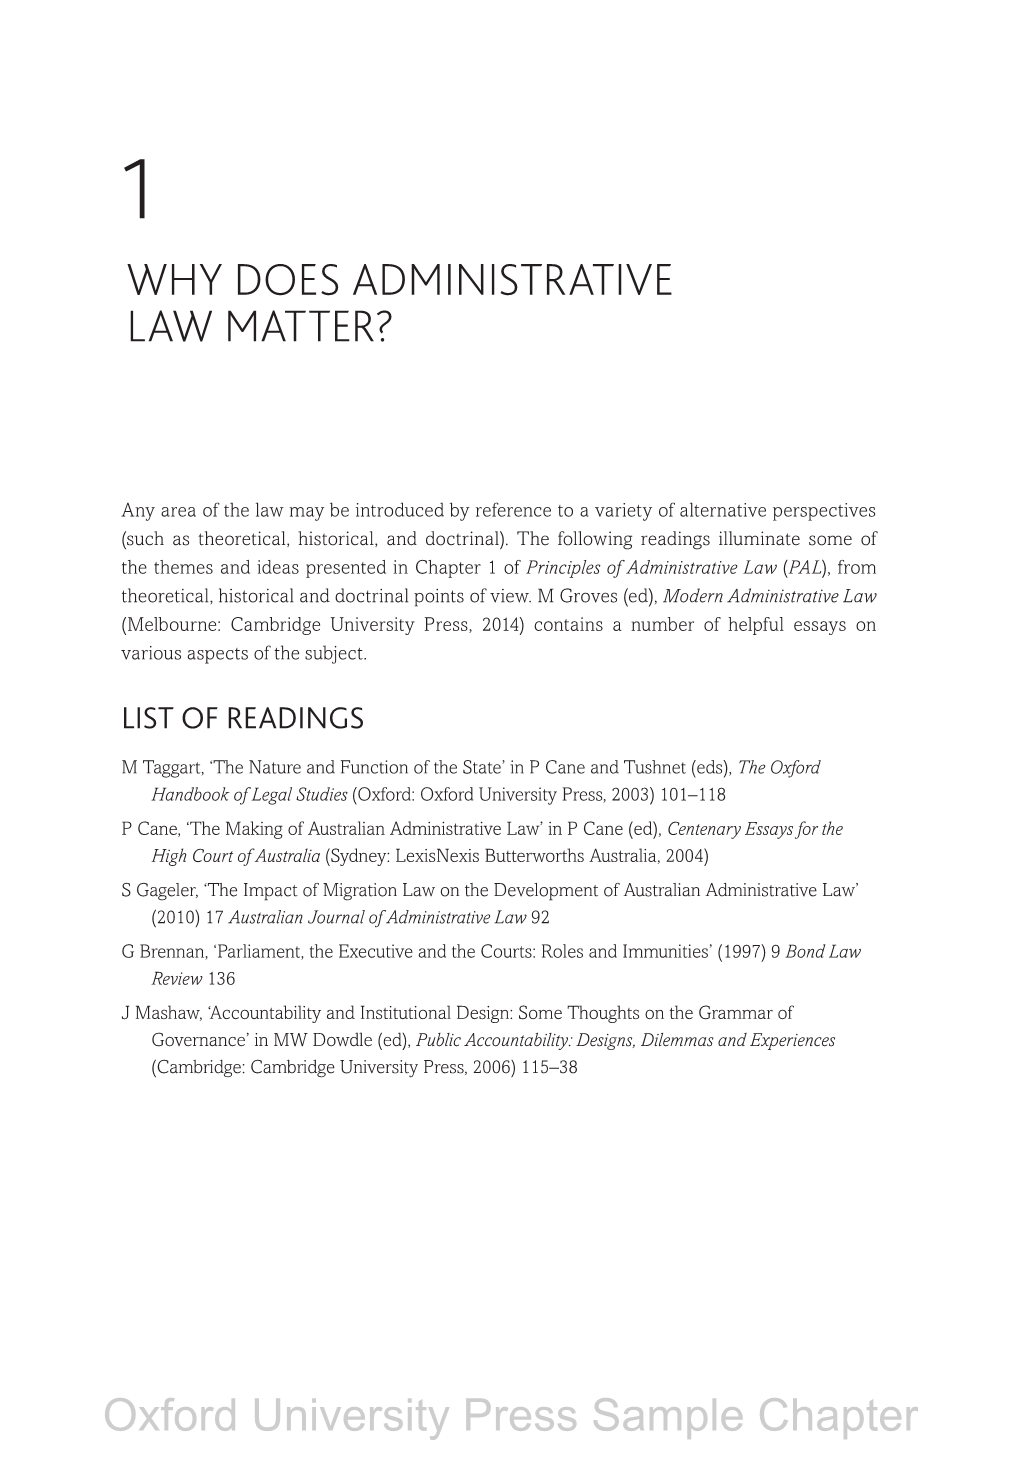 Why Does Administrative Law Matter?